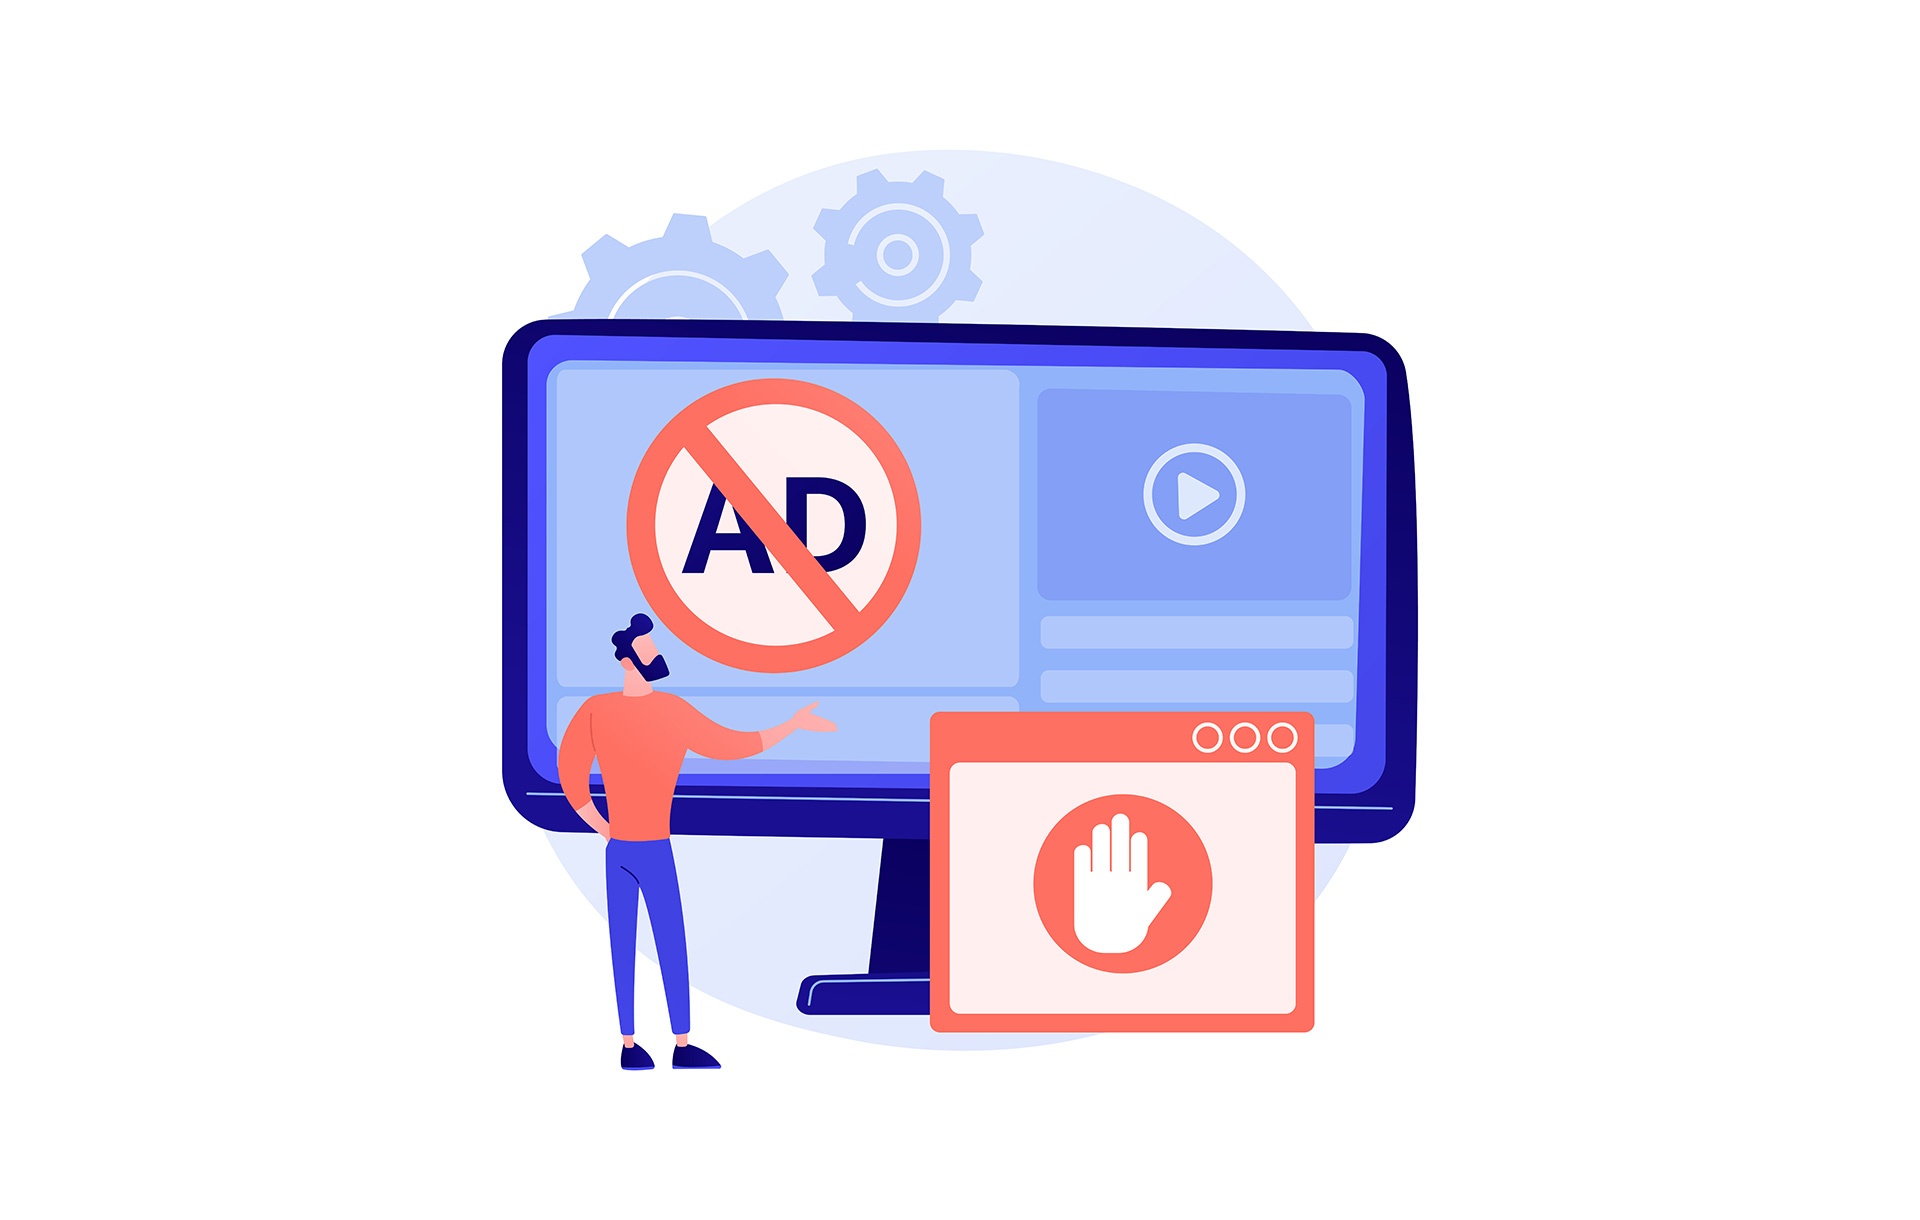 Solutions to ad-blocking? Easy, UX and GOOD content.